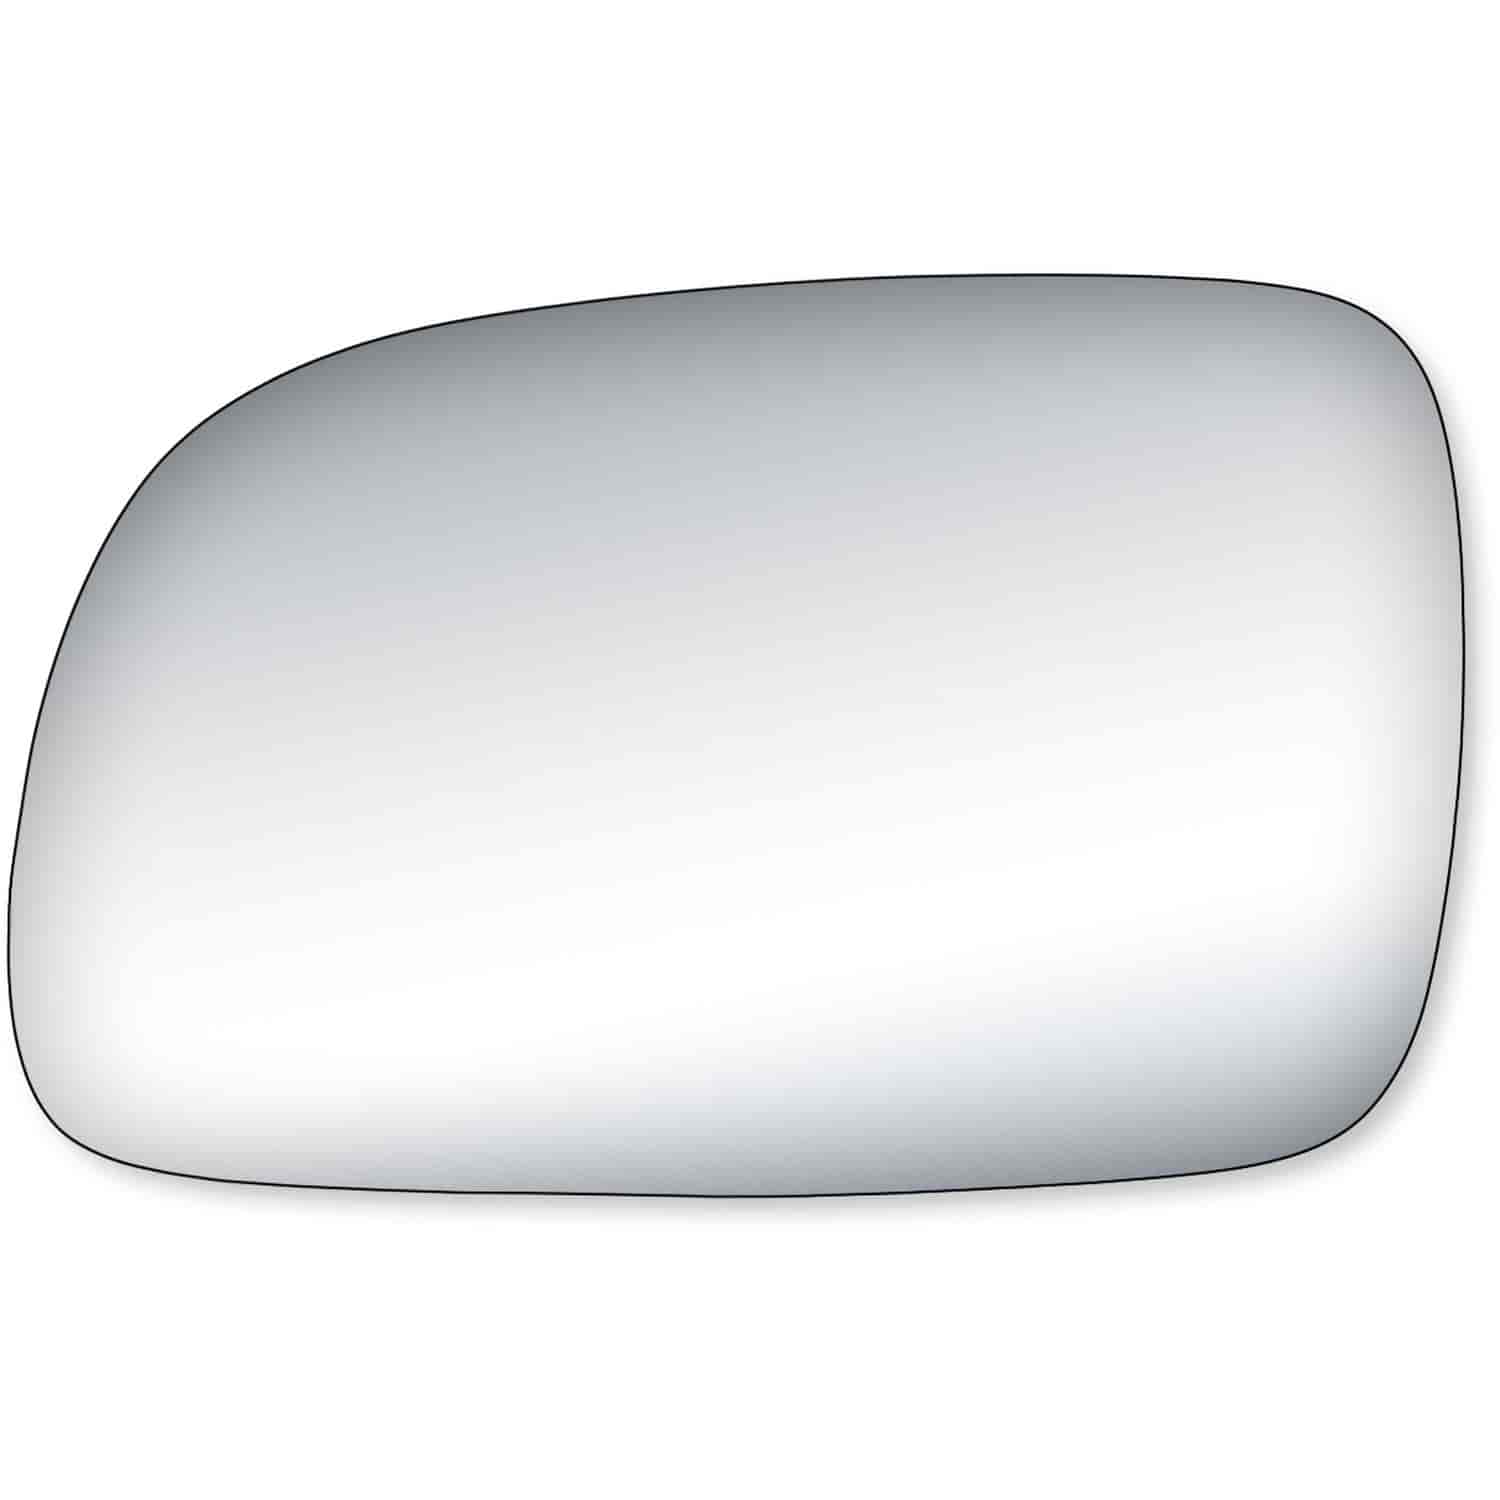 Replacement Glass for 99-04 Grand Cherokee the glass measures 4 13/16 tall by 7 5/8 wide and 8 3/4 d